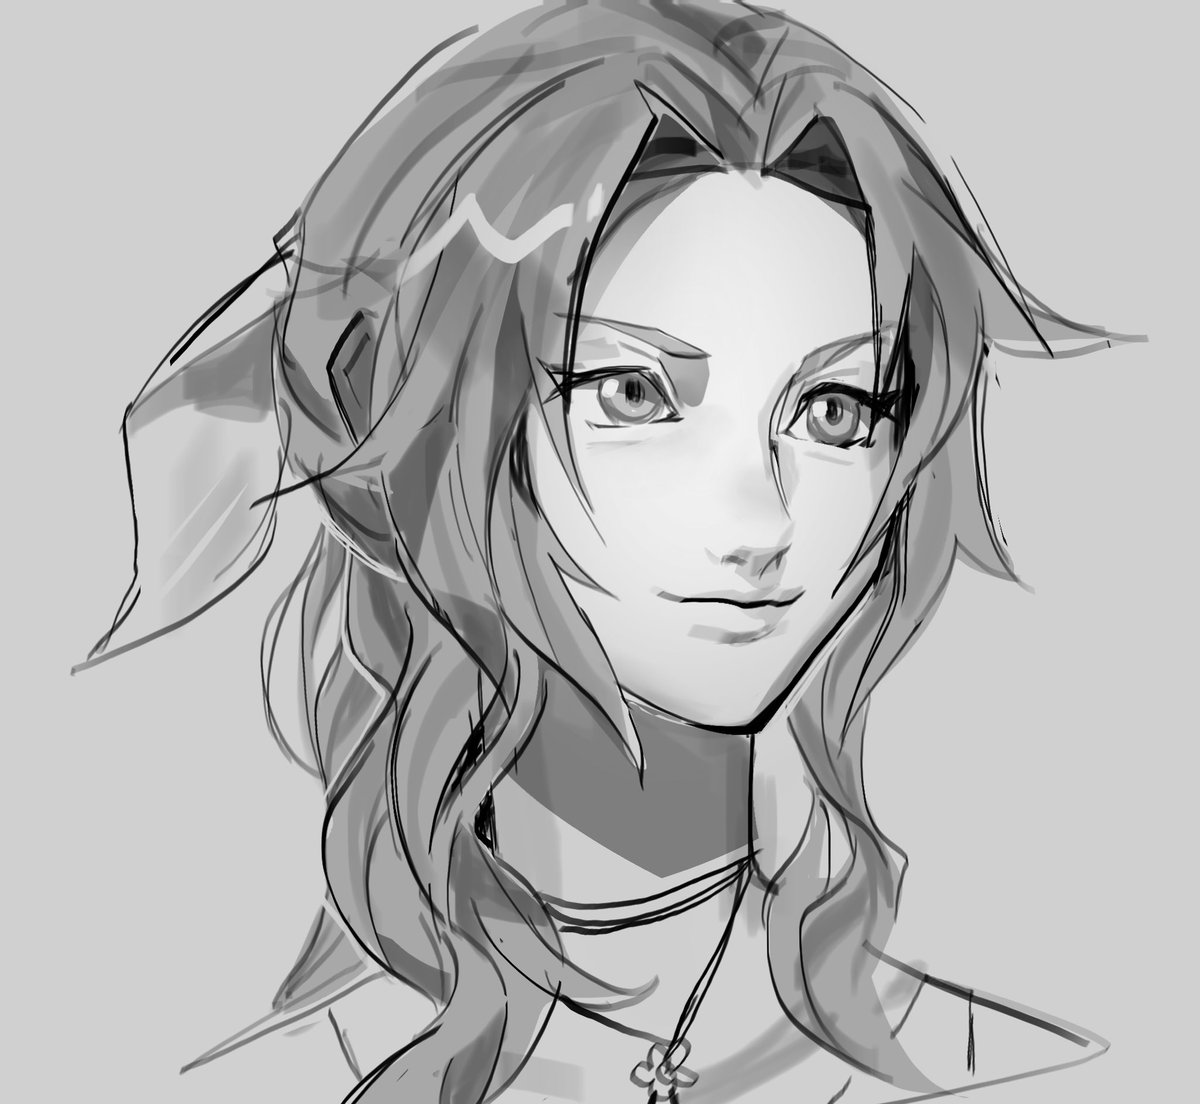 This is supposed to be Aerith lmao
#FFVII